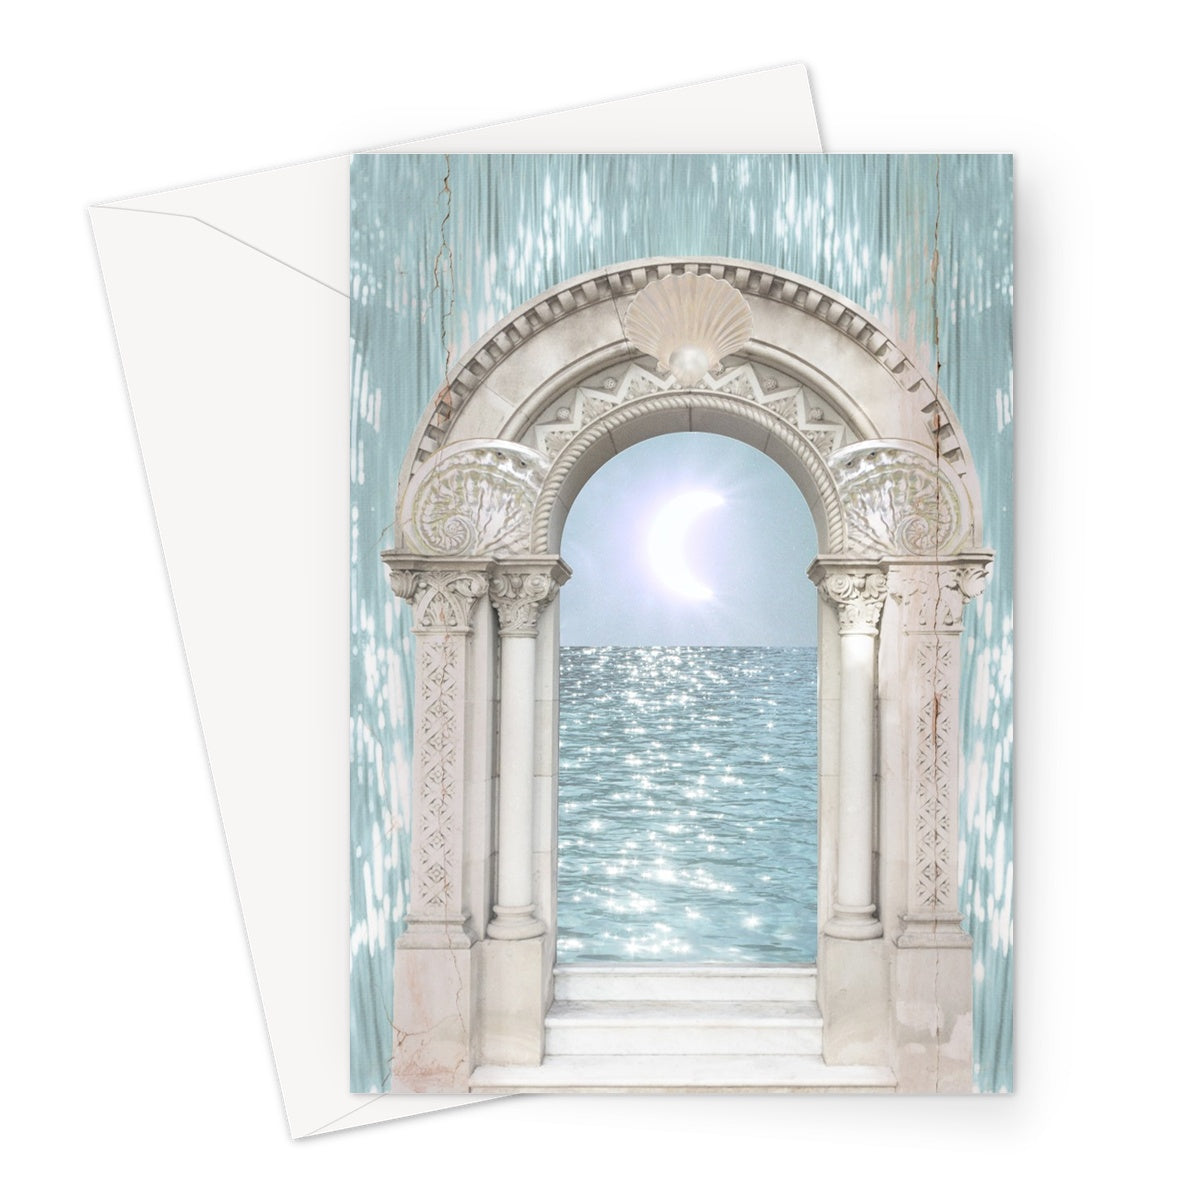 The Expanse Greeting Card - Starseed Designs Inc.